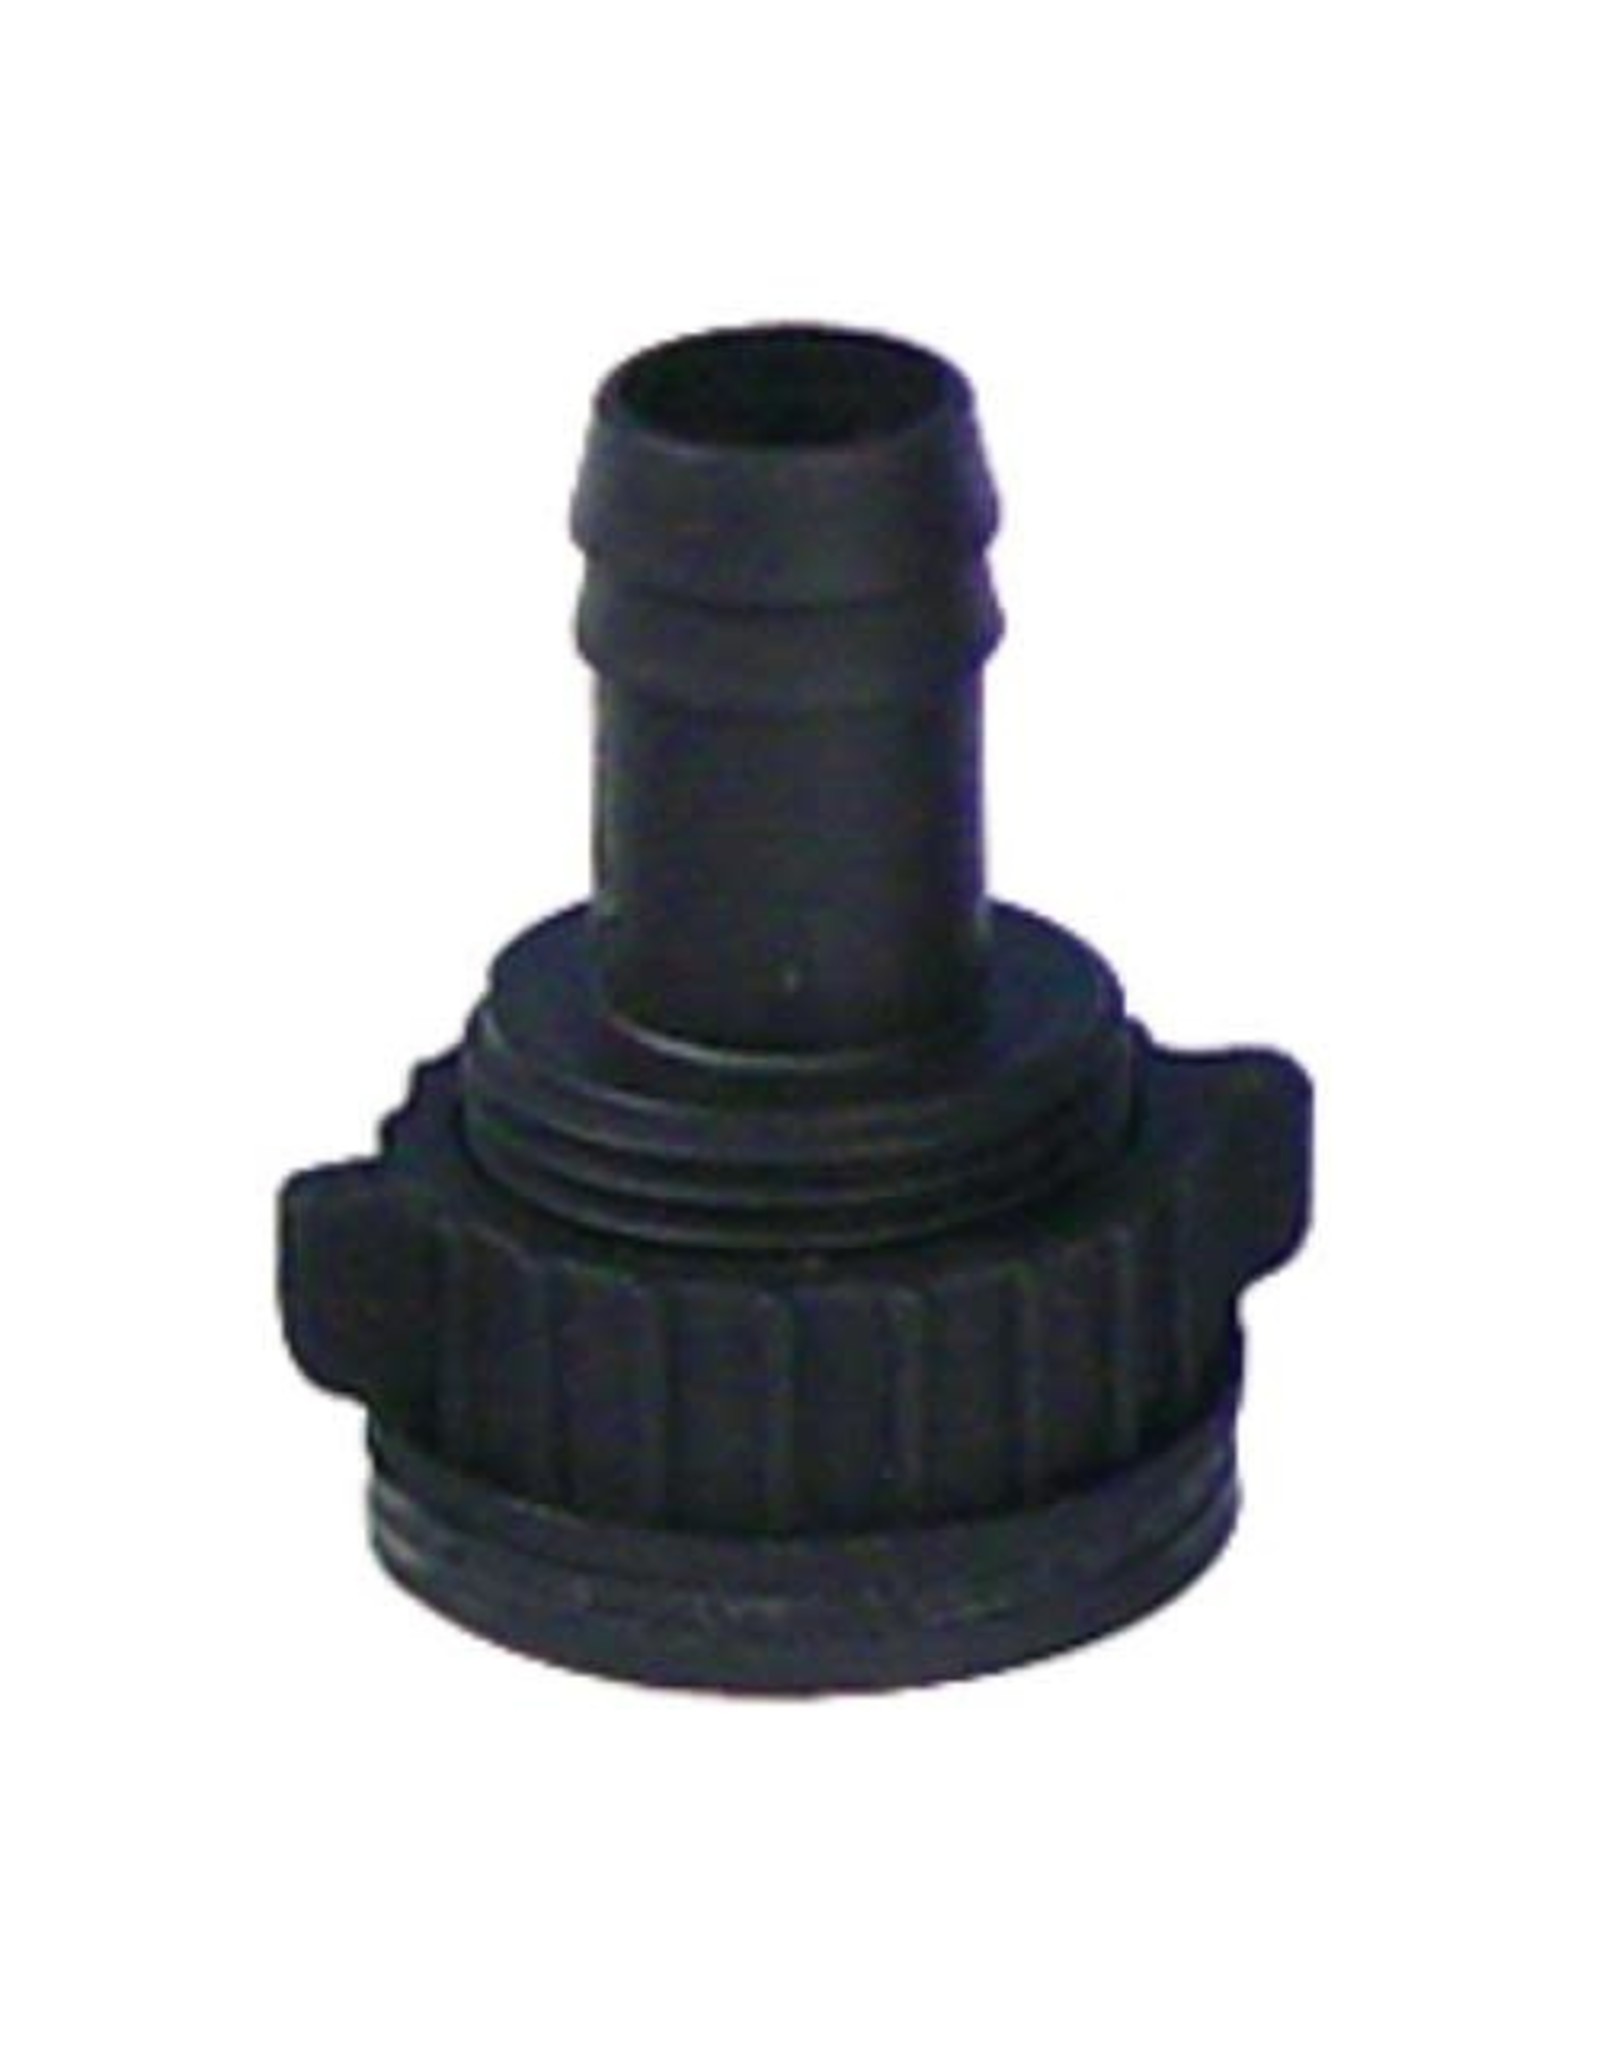 Hydro Flow Hydro Flow Ebb & Flow Tub Outlet Fitting 3/4 in (19mm)